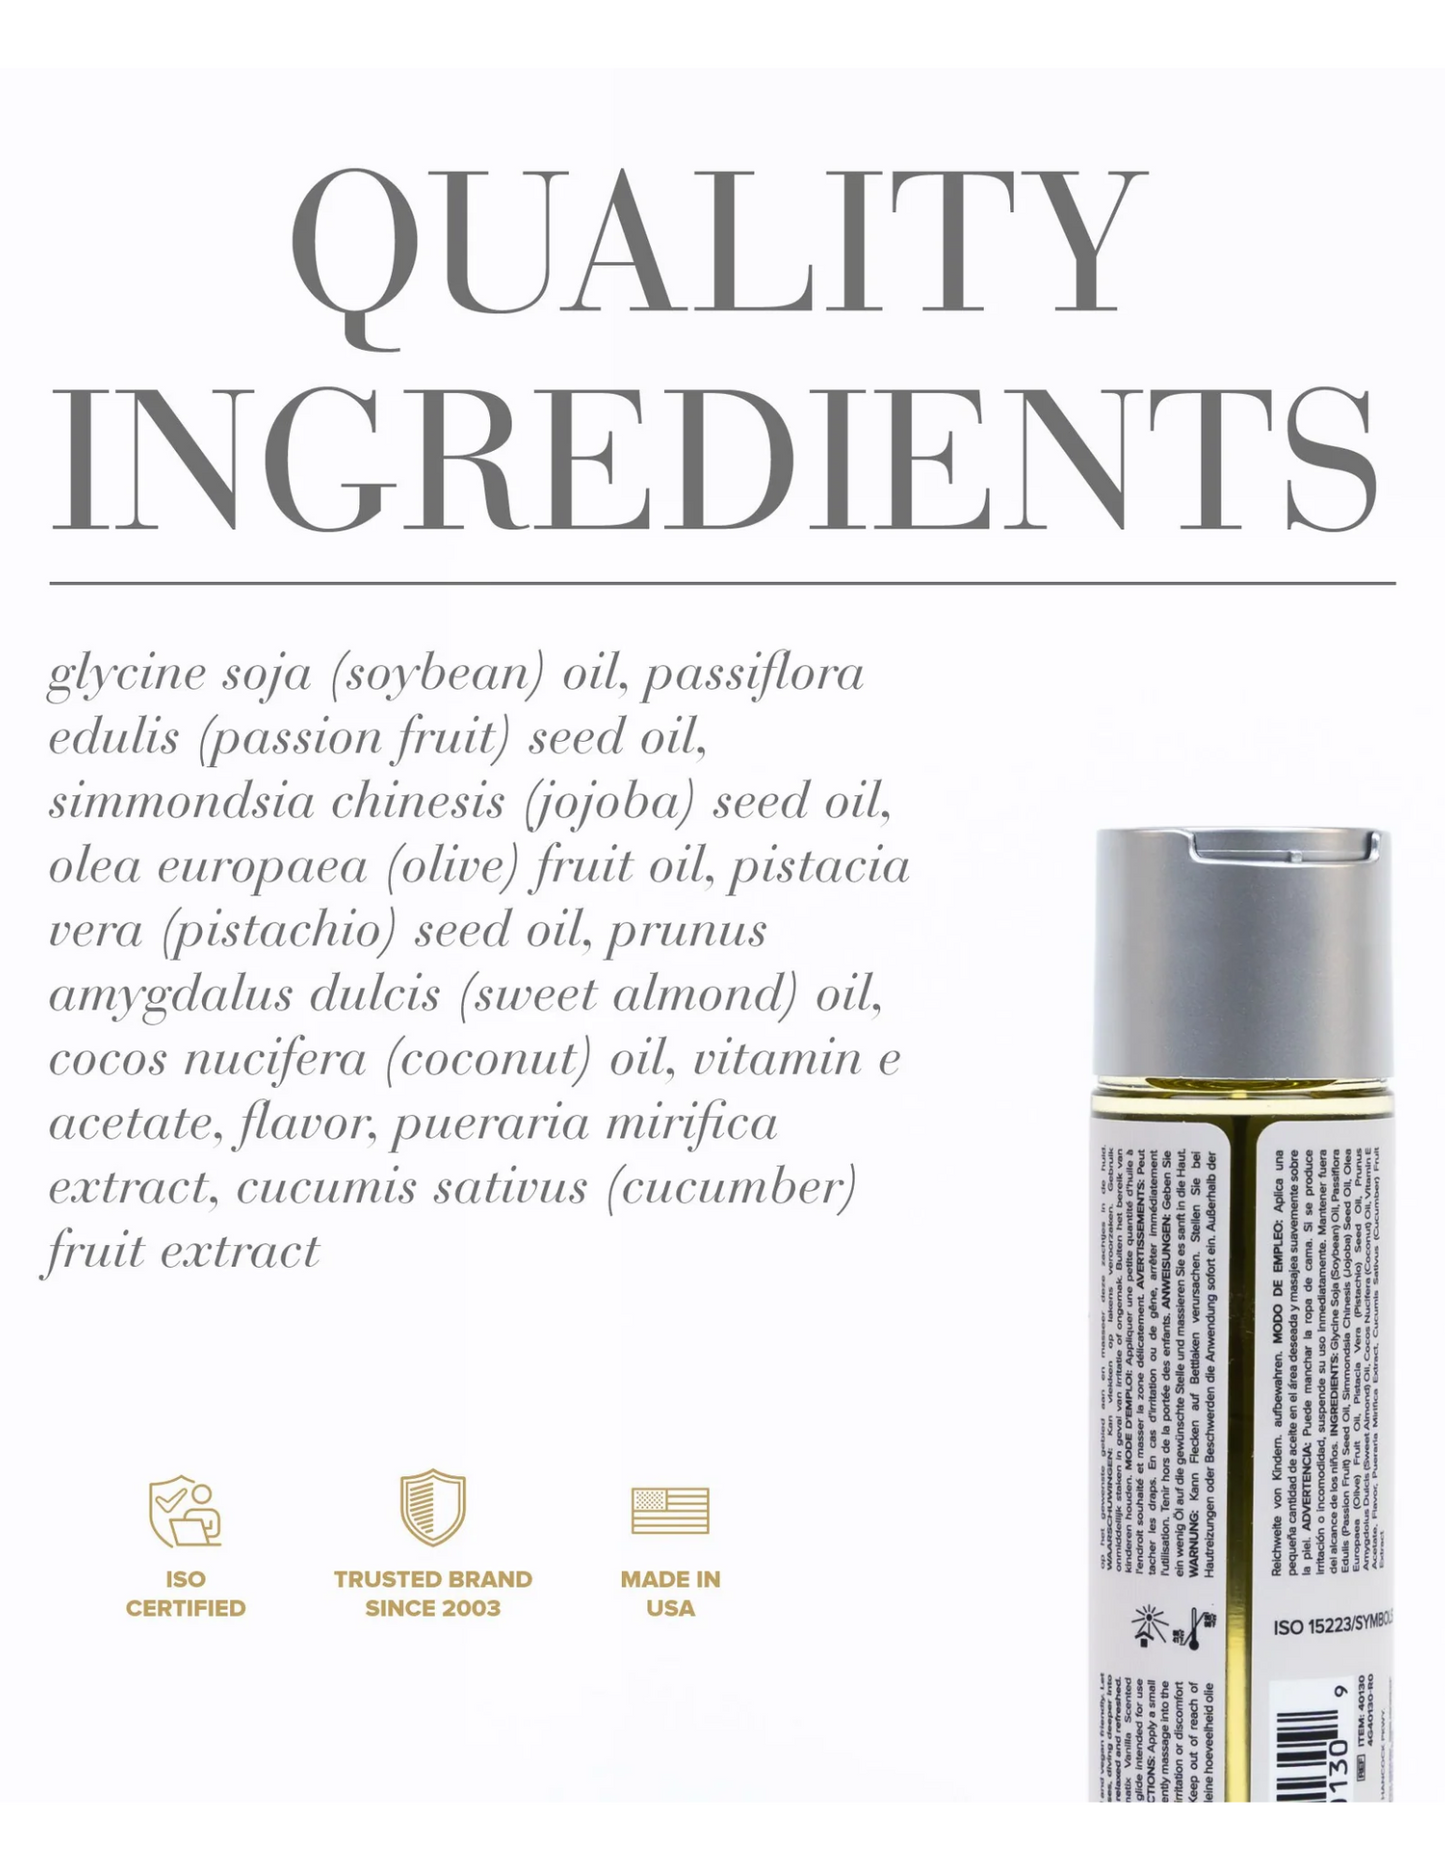 Ad showing the ingredient list for the System JO Aromatix Vanilla scented massage oil.